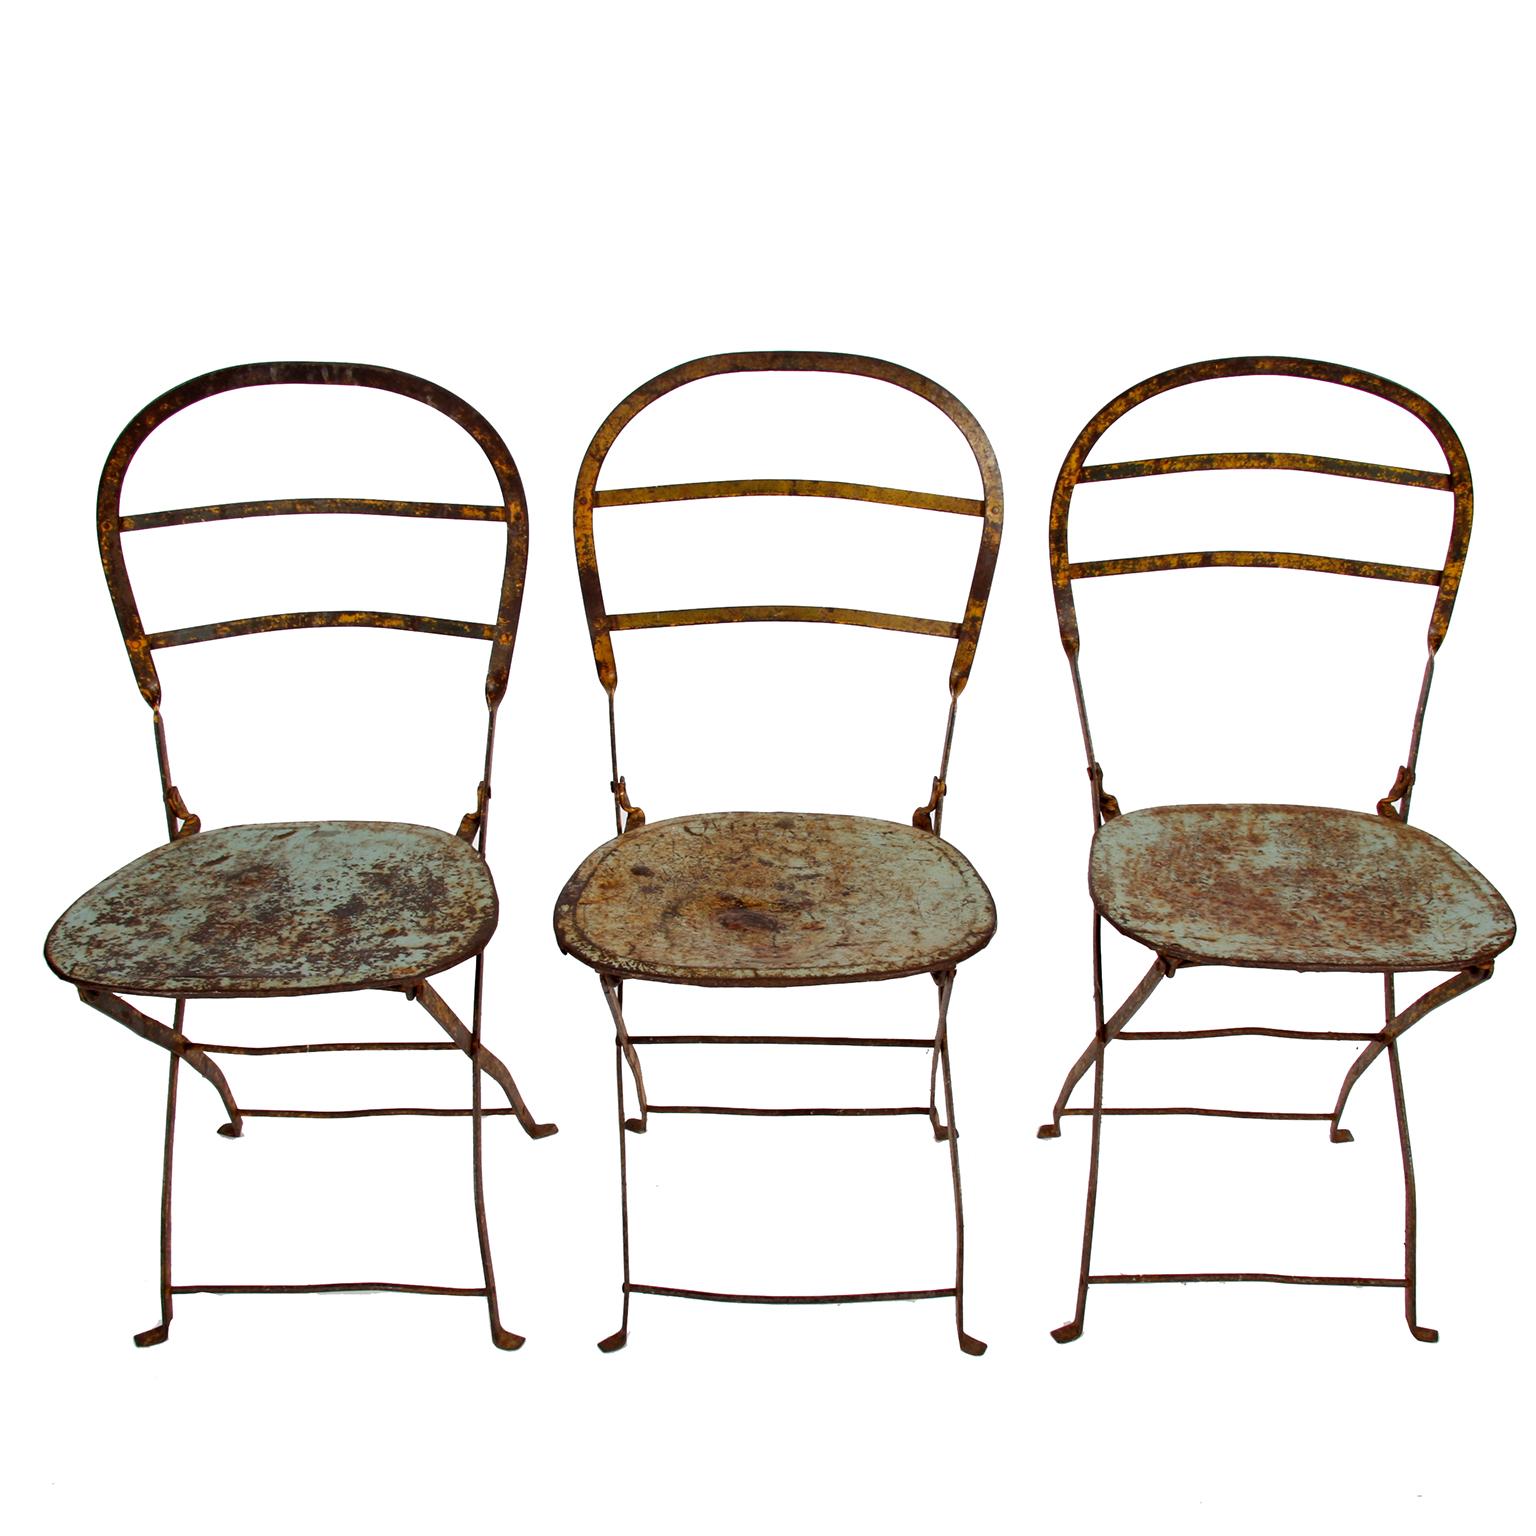 French, 19th century

A set of six, wrought iron and steel, folding chairs. Scraped back to the original paint. With great patina.